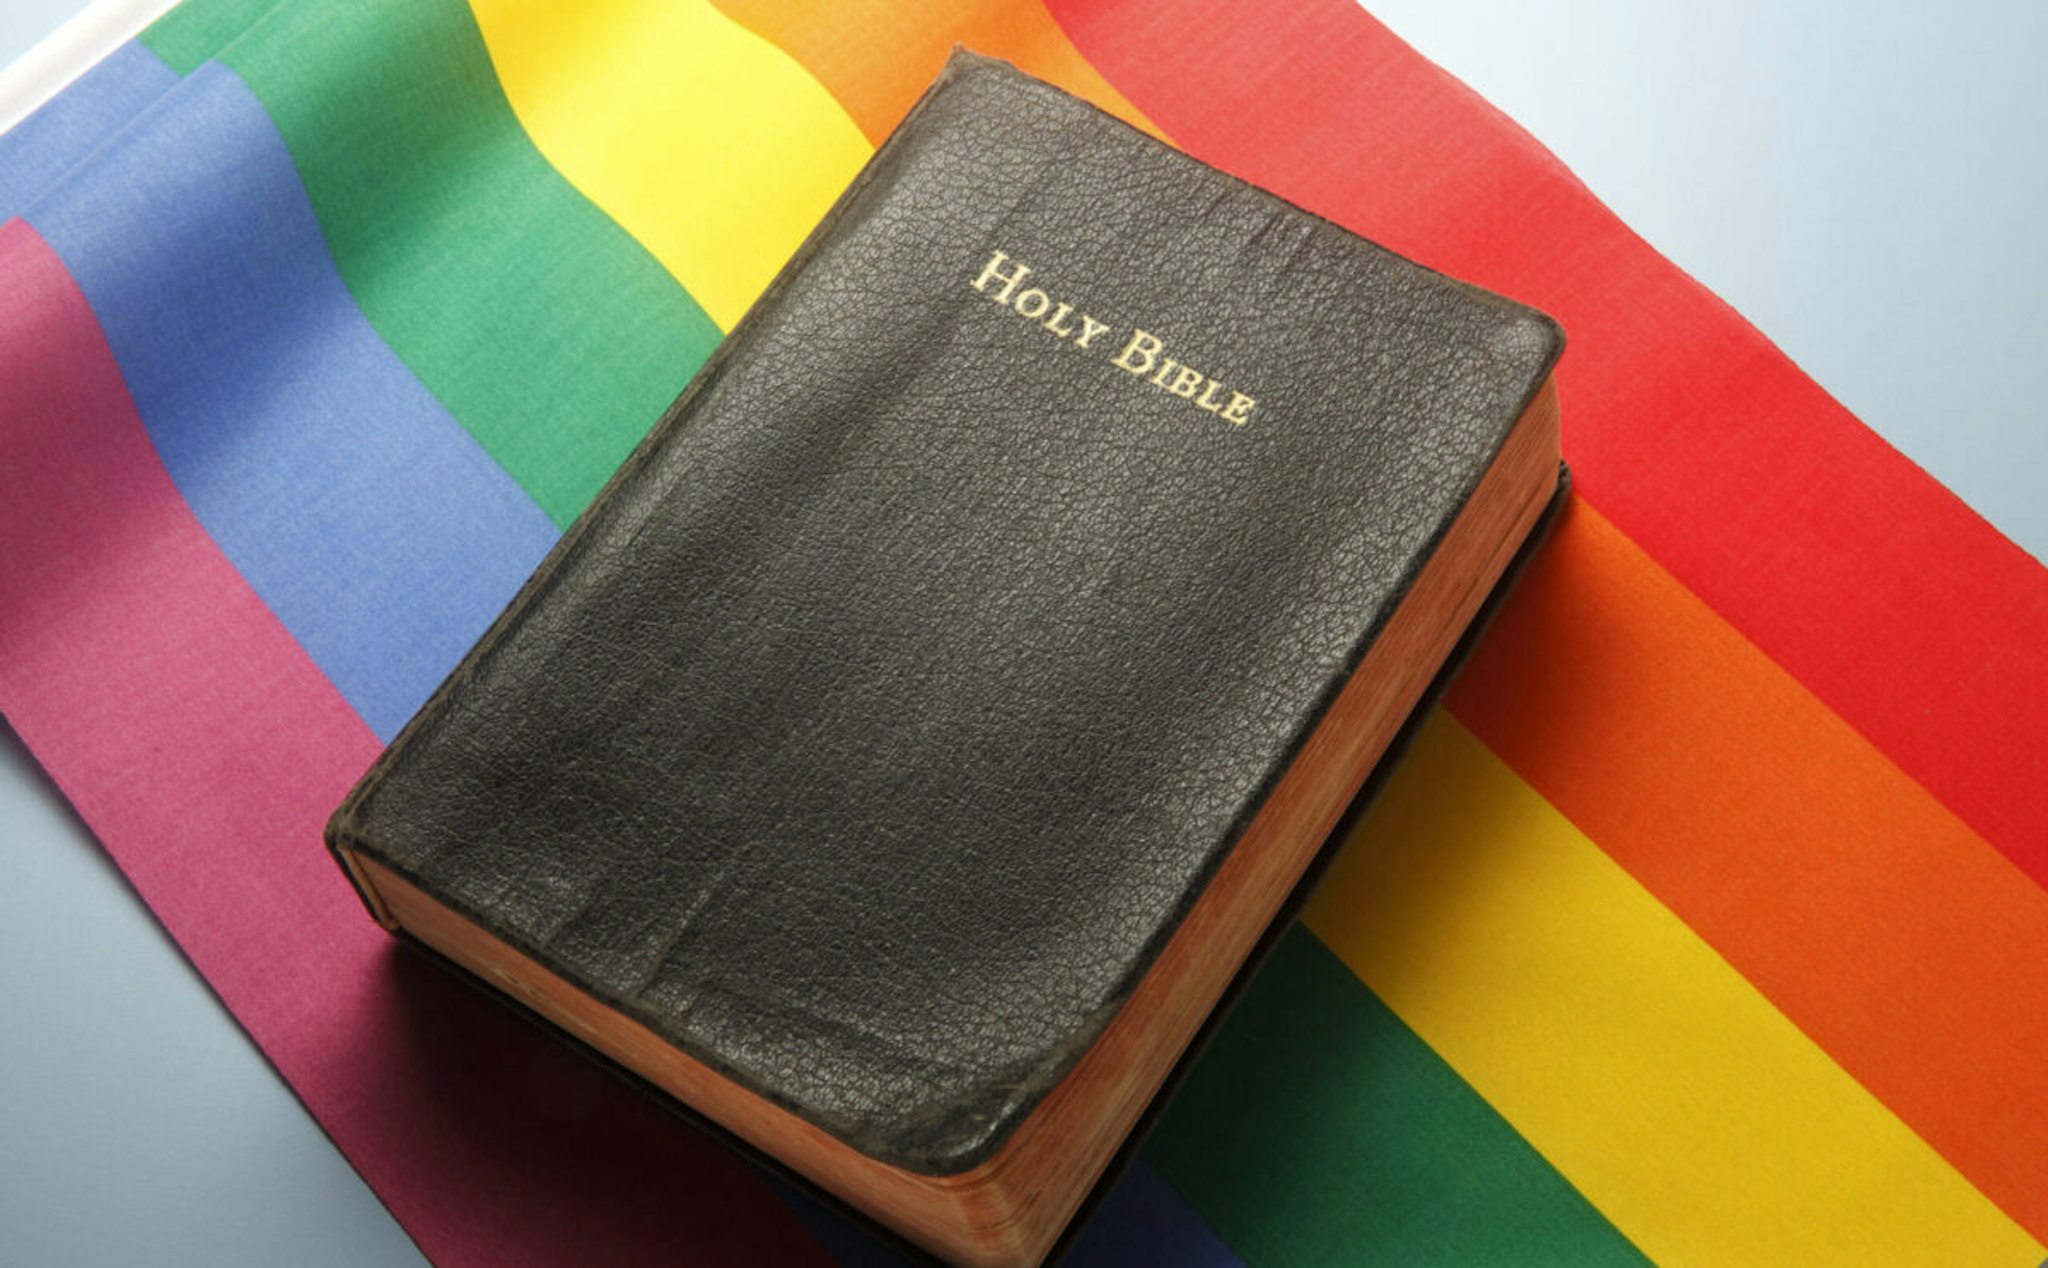 A Holy Bible sitting on top of a rainbow flag illustrating the conflicts between religion and LGBT issues.